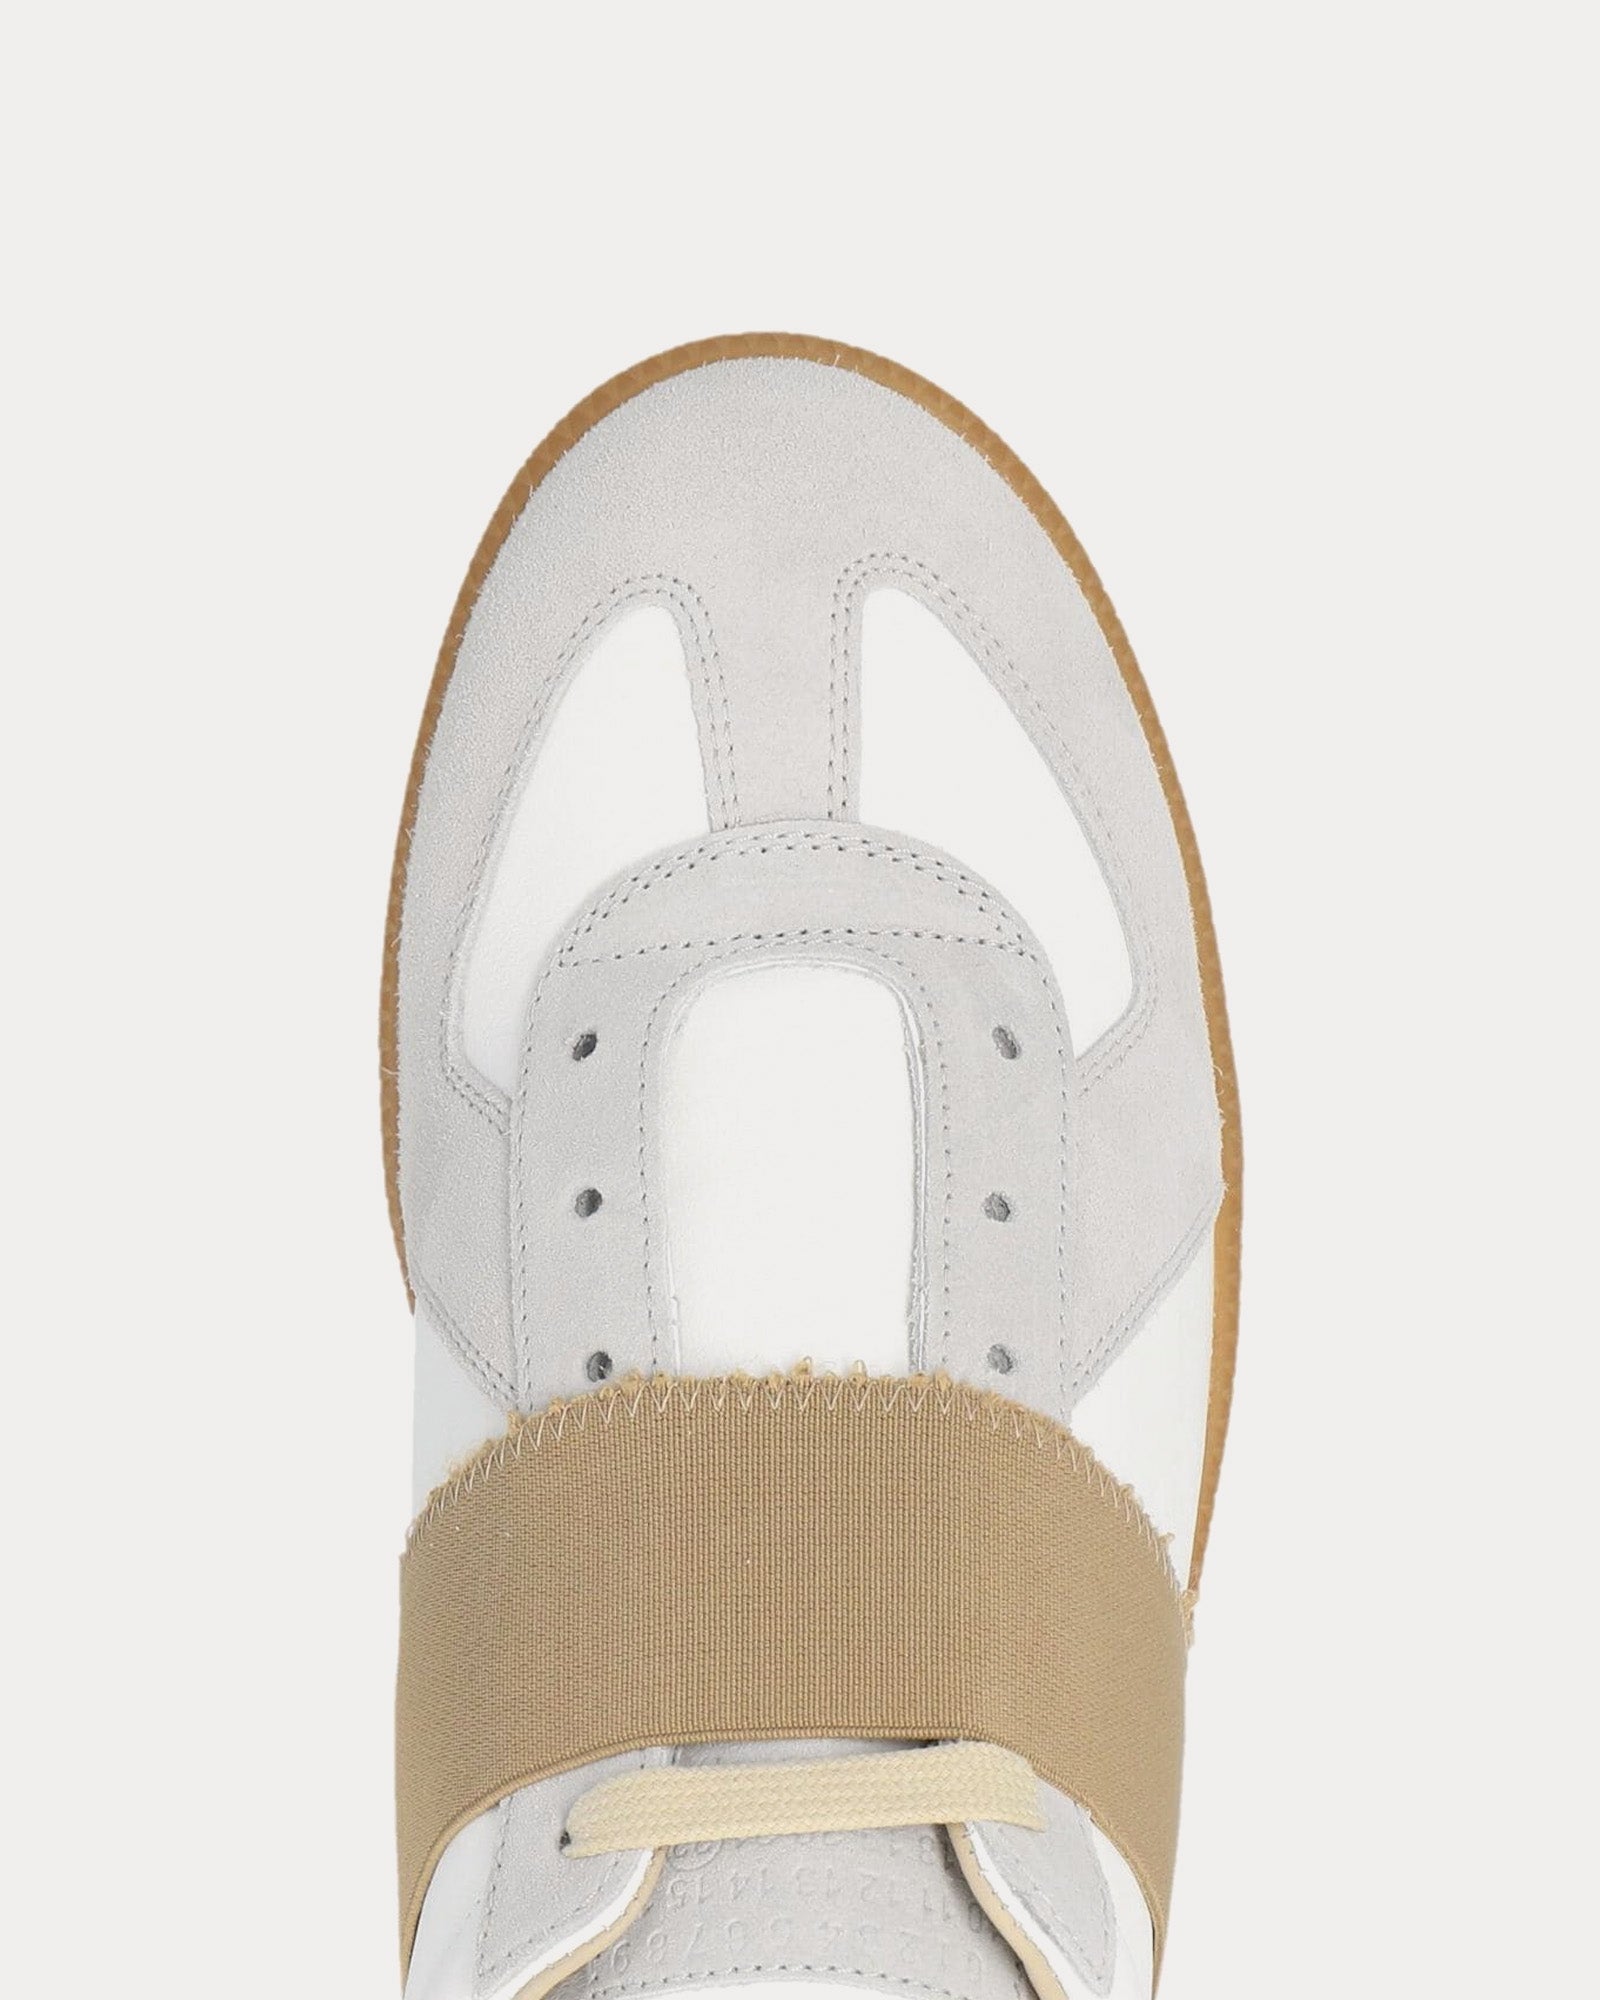 Maison Margiela - Replica Elasticated Band White / Light Grey / Beige Low Top Sneakers